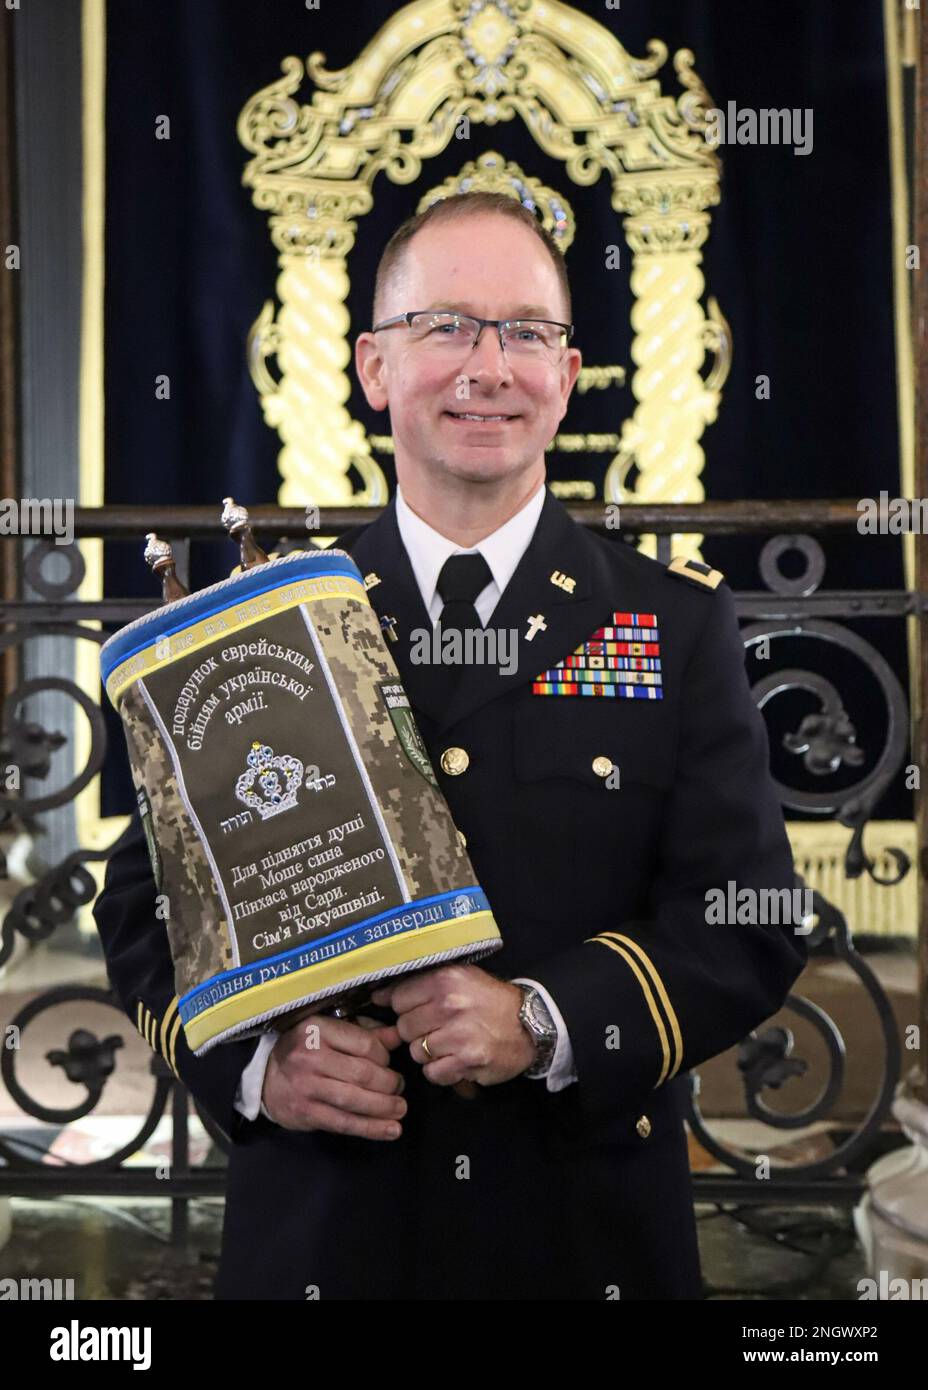 WARSAW, Poland - U.S. Army V Corps Chaplain Col. Benjamin Sprouse holds a Torah Scroll dedicated to the Ukrainian Army after the signing ceremony was completed, Nov. 29, 2022, Warsaw, Poland. Jewish Chaplains alongside distinguished guests, refugees from Ukraine and U.S. ally partner nations attended the event to support the Ukrainian Chaplaincy’s religious support efforts. Stock Photo